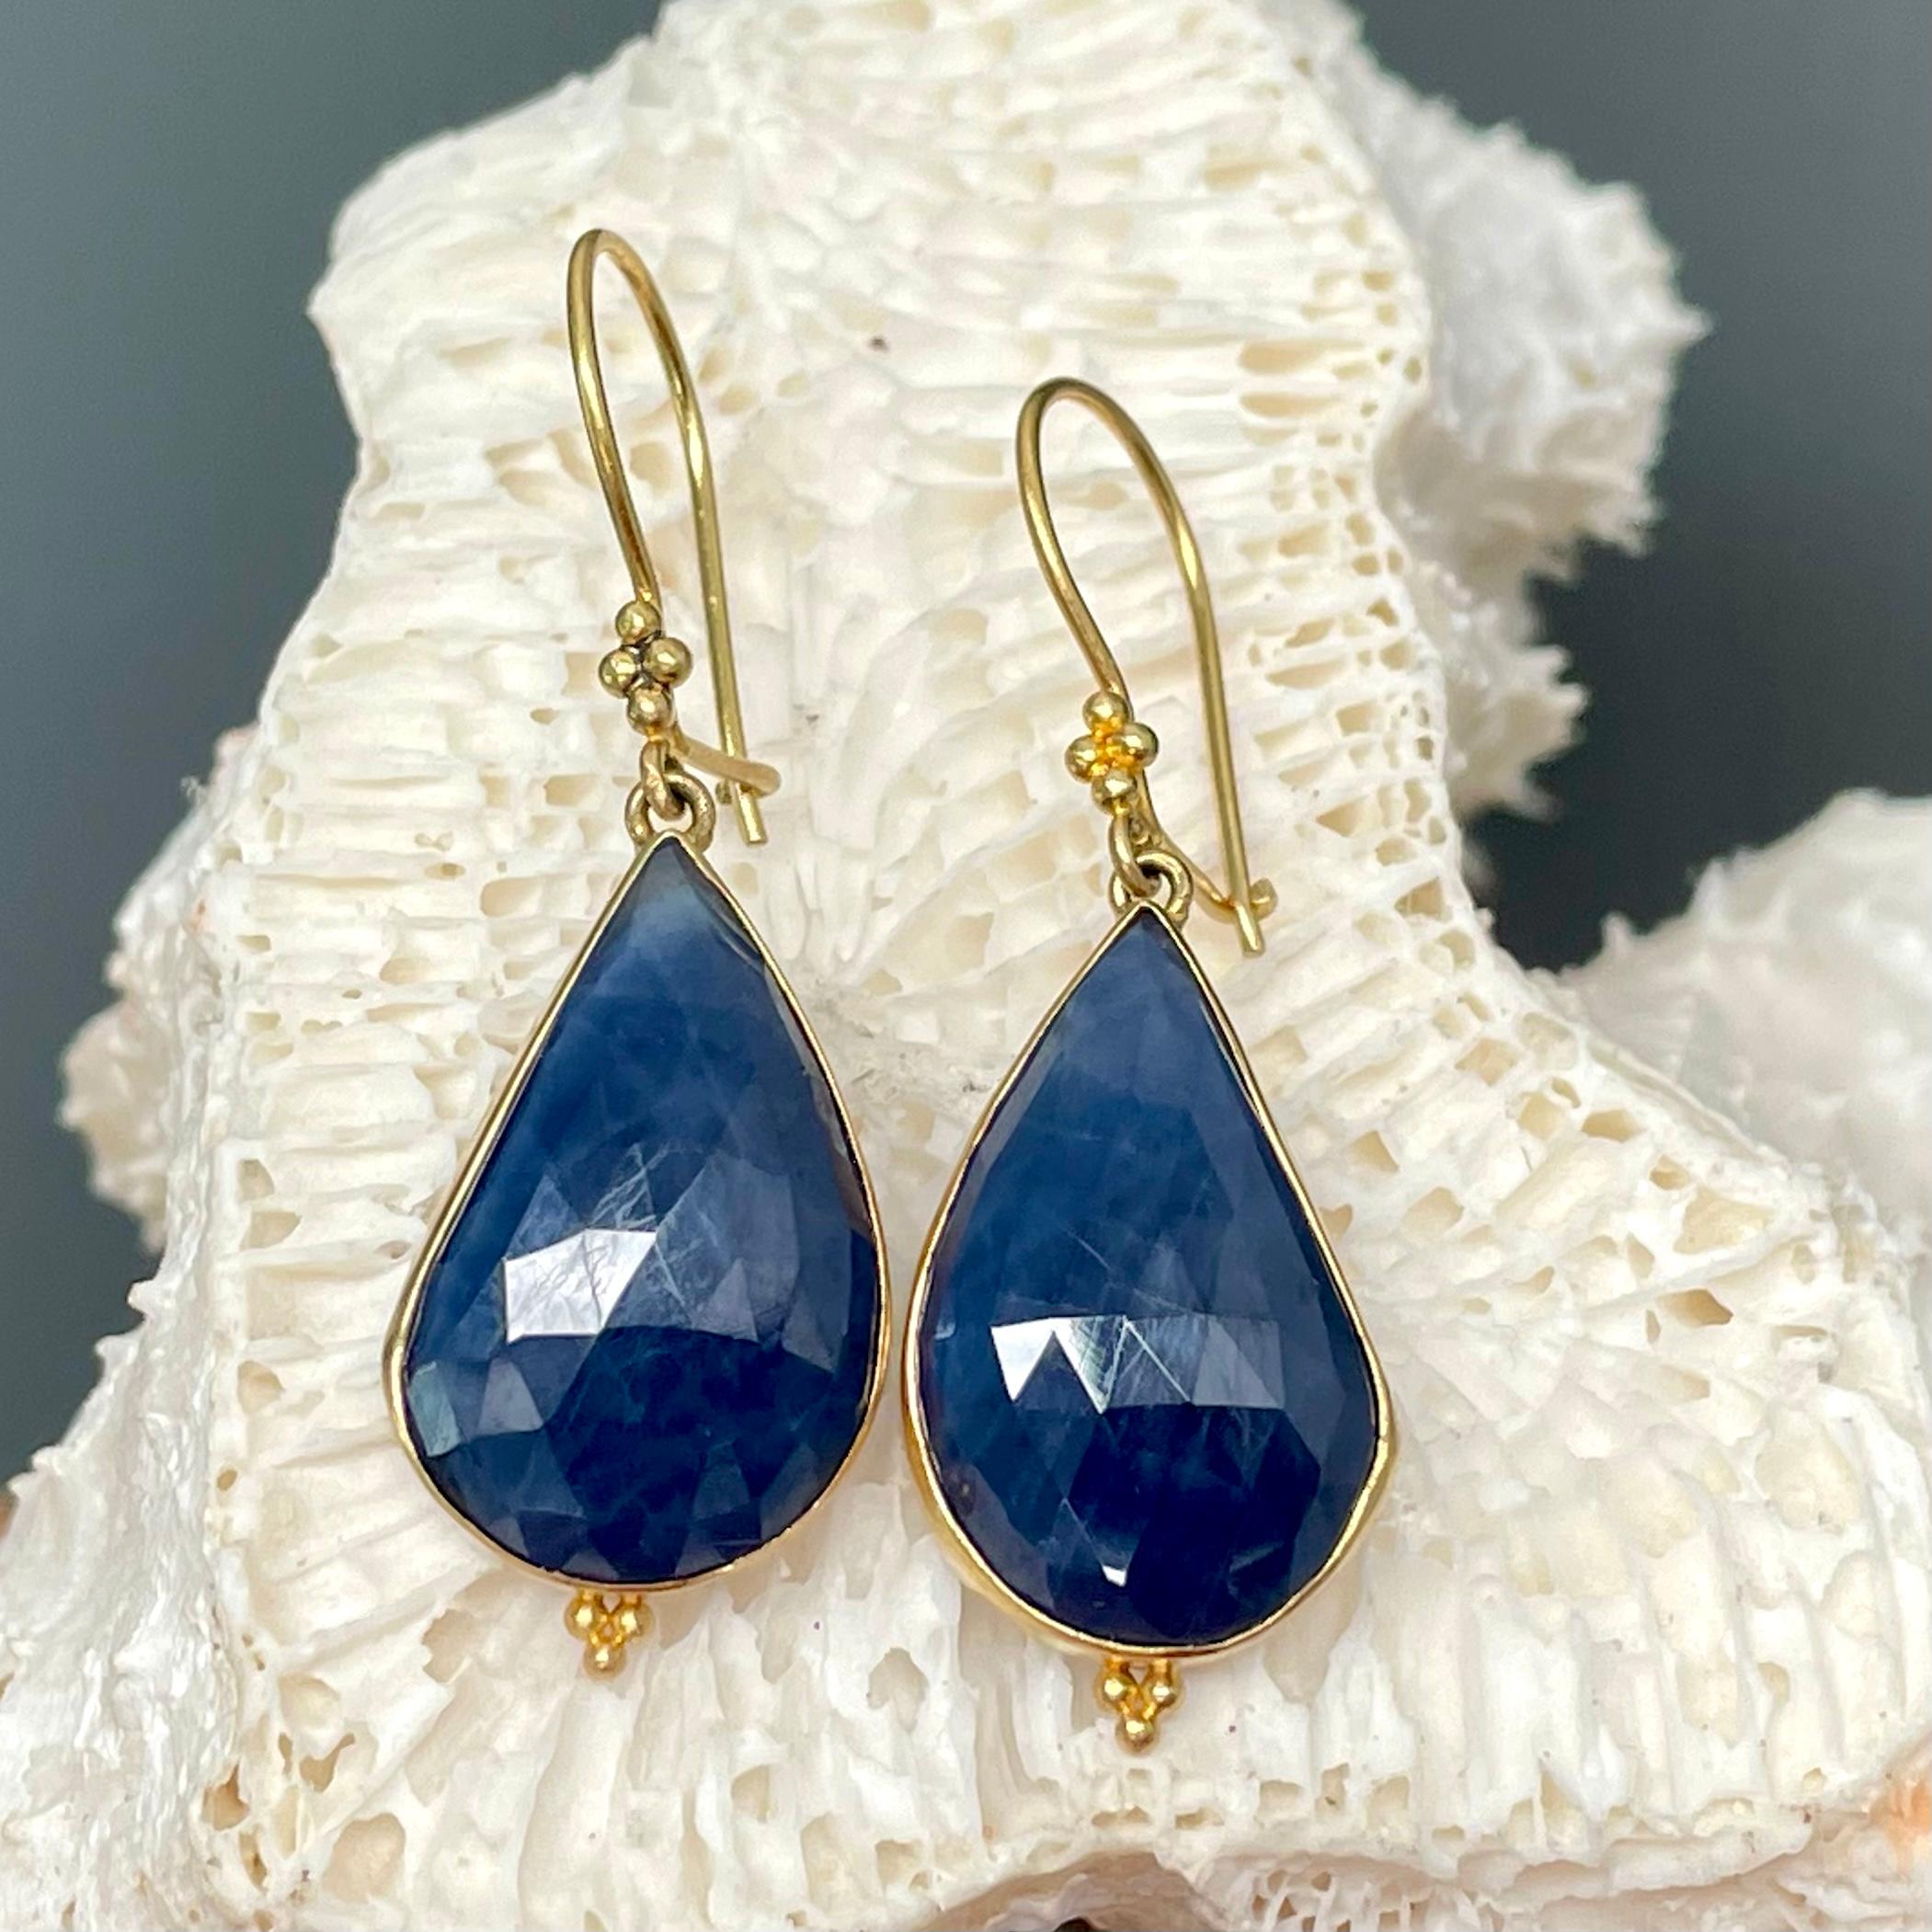 Two symmetrical rose-cut blue sapphire 12 x 19 mm drops are set in simple 18K bezels with 3 small granulation at bottom.  All suspended below safety clasp wires with a diamond 4 granulation accent.  Simple and Elegant!